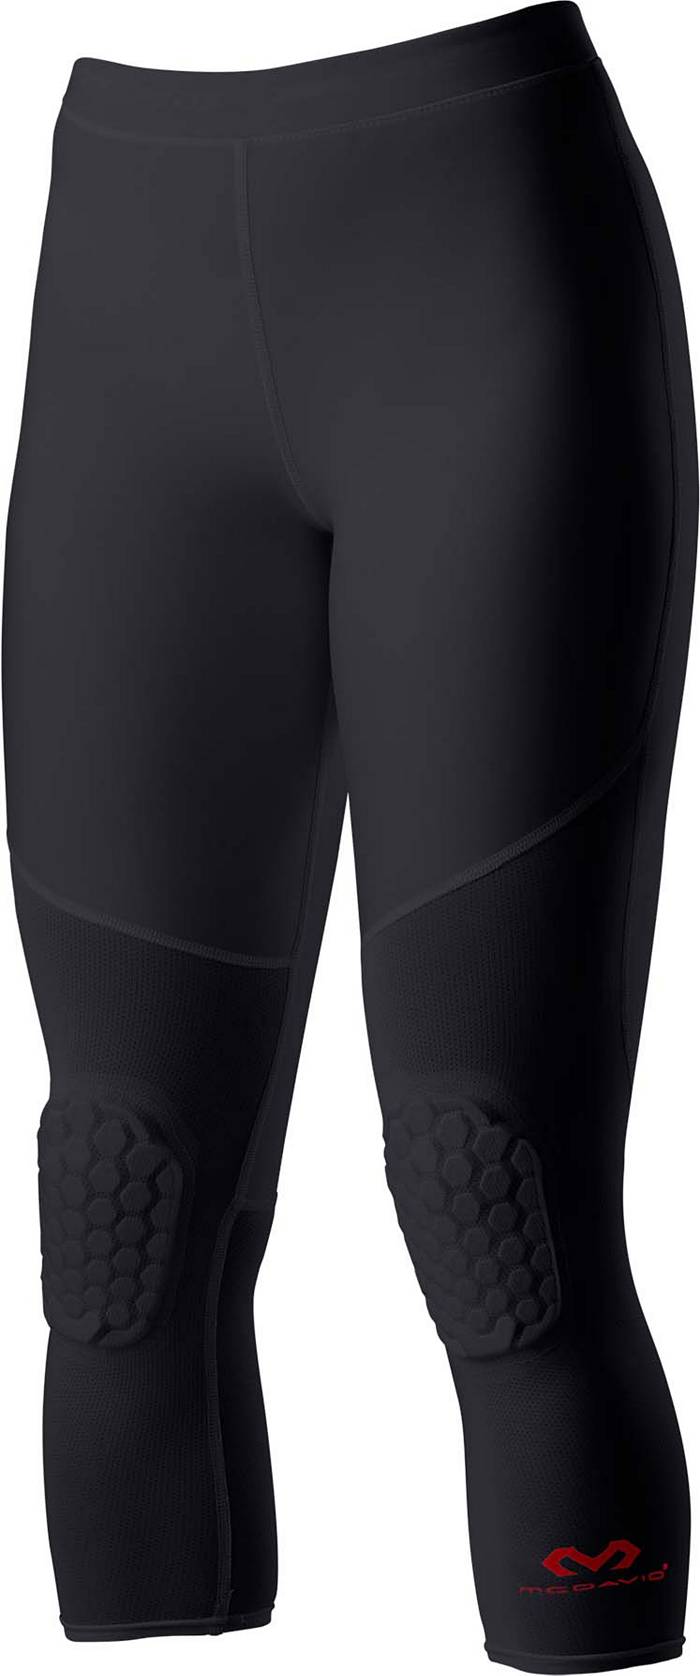 McDavid Women's Hex 2-Pad 3/4 Basketball Tights with Knee Pads, Large, Black